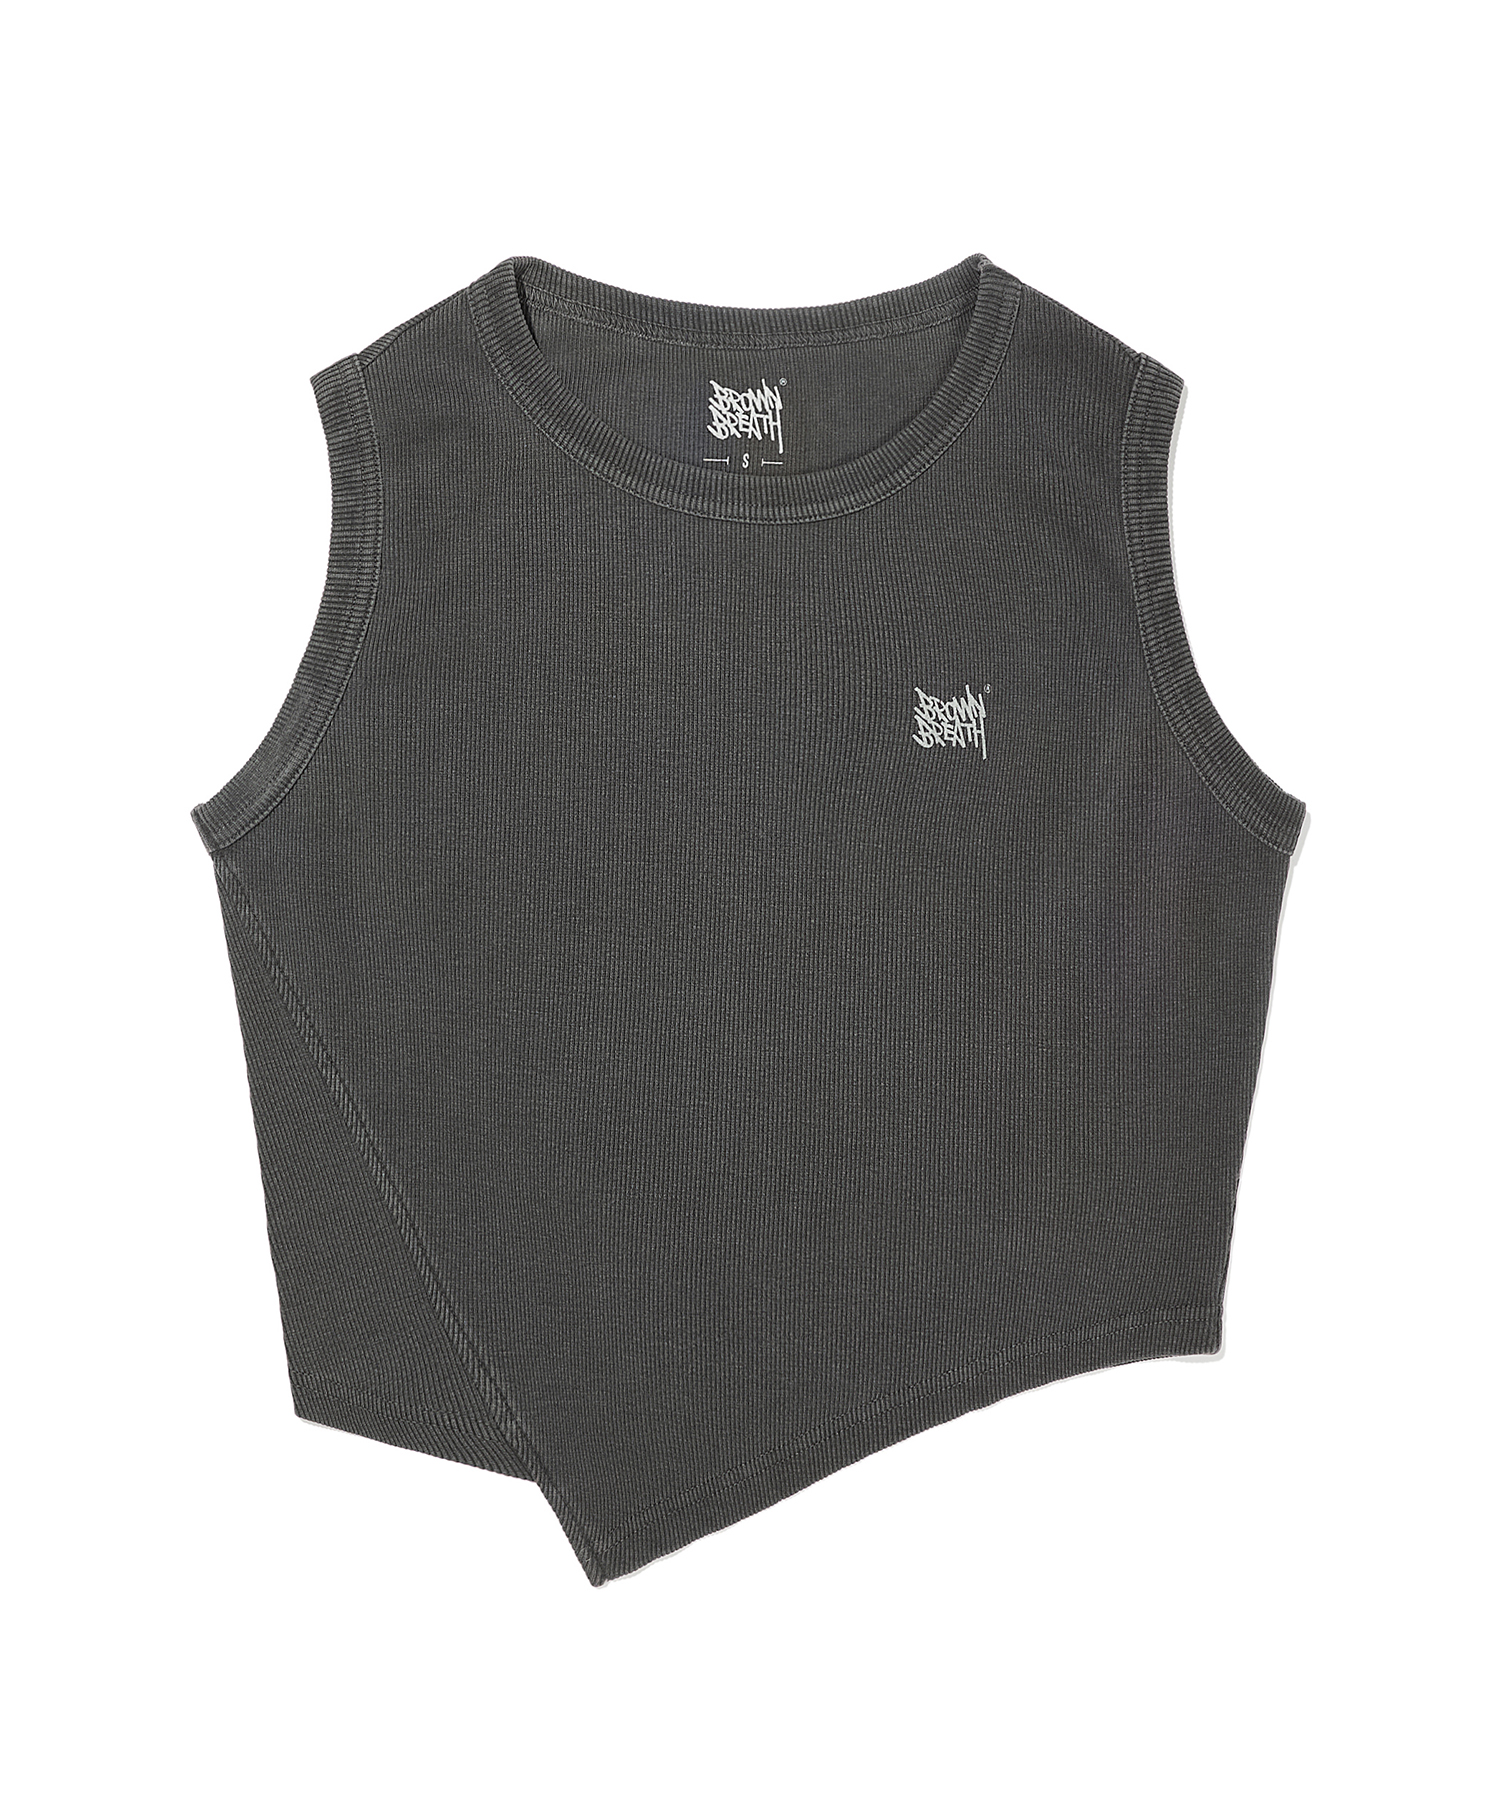 W TAG PIGMENT SLOPE TANK TOP - CHARCOAL brownbreath